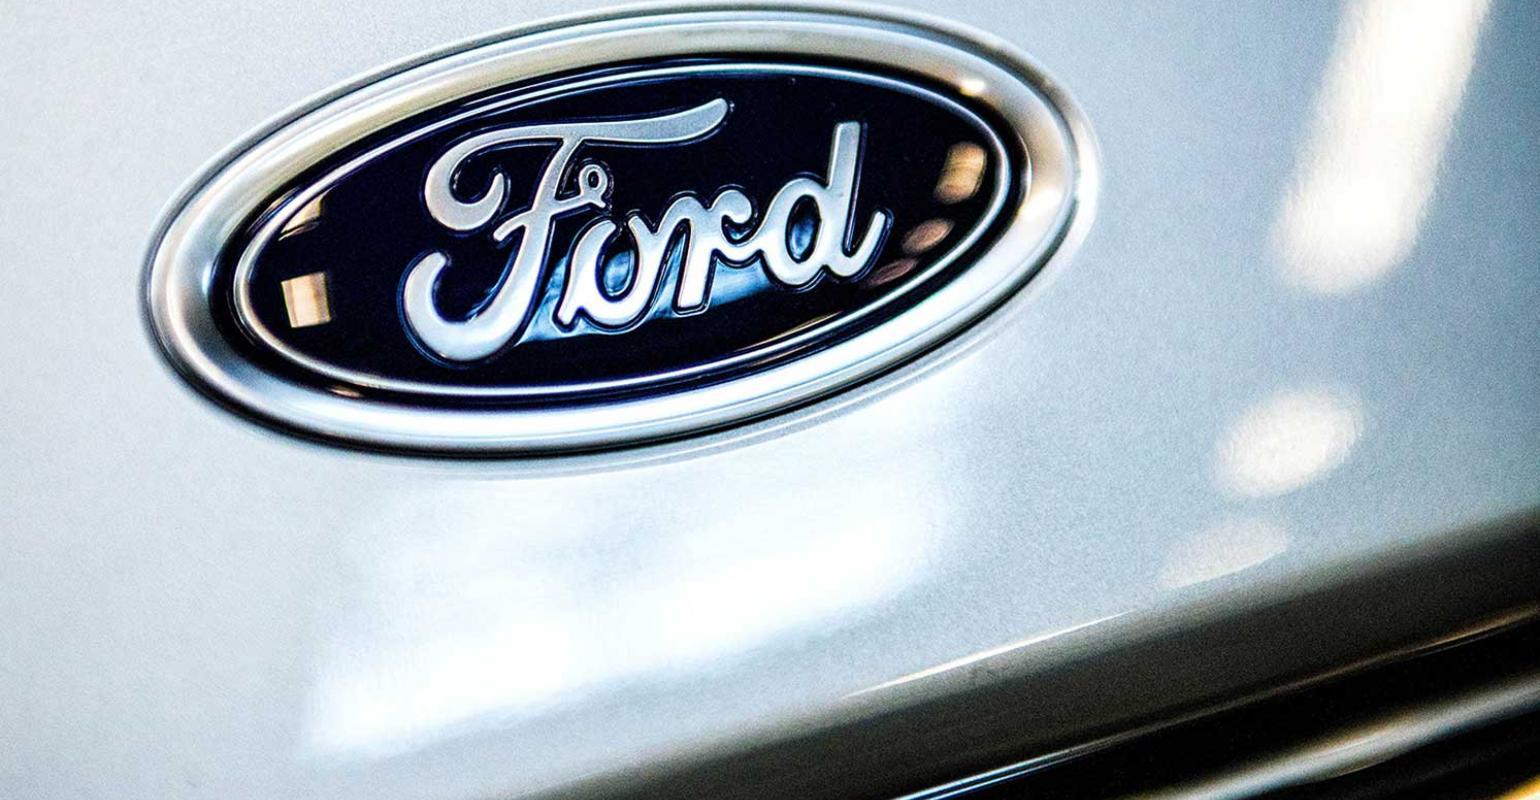 China Automotive Company Logo - Ford Cancels Plans to Import SUV Model from China in Wake of Tariffs ...